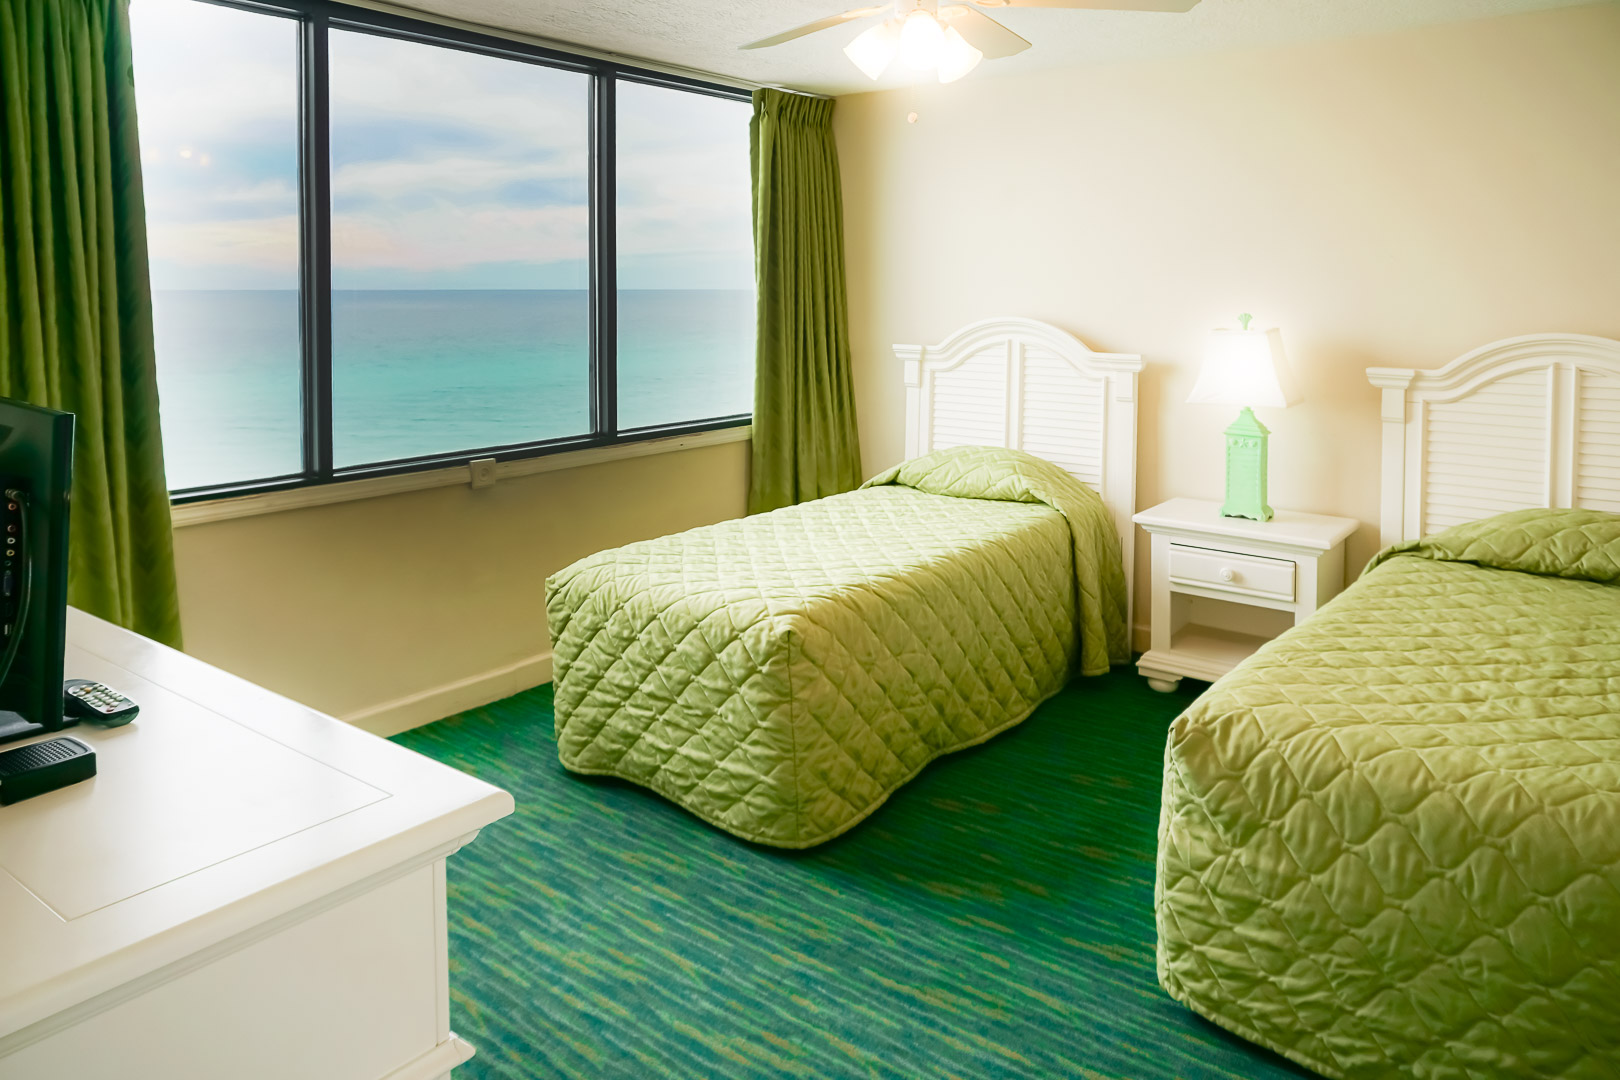 A two bedroom unit with double beds at VRI's Landmark Holiday Beach Resort in Panama City, Florida.